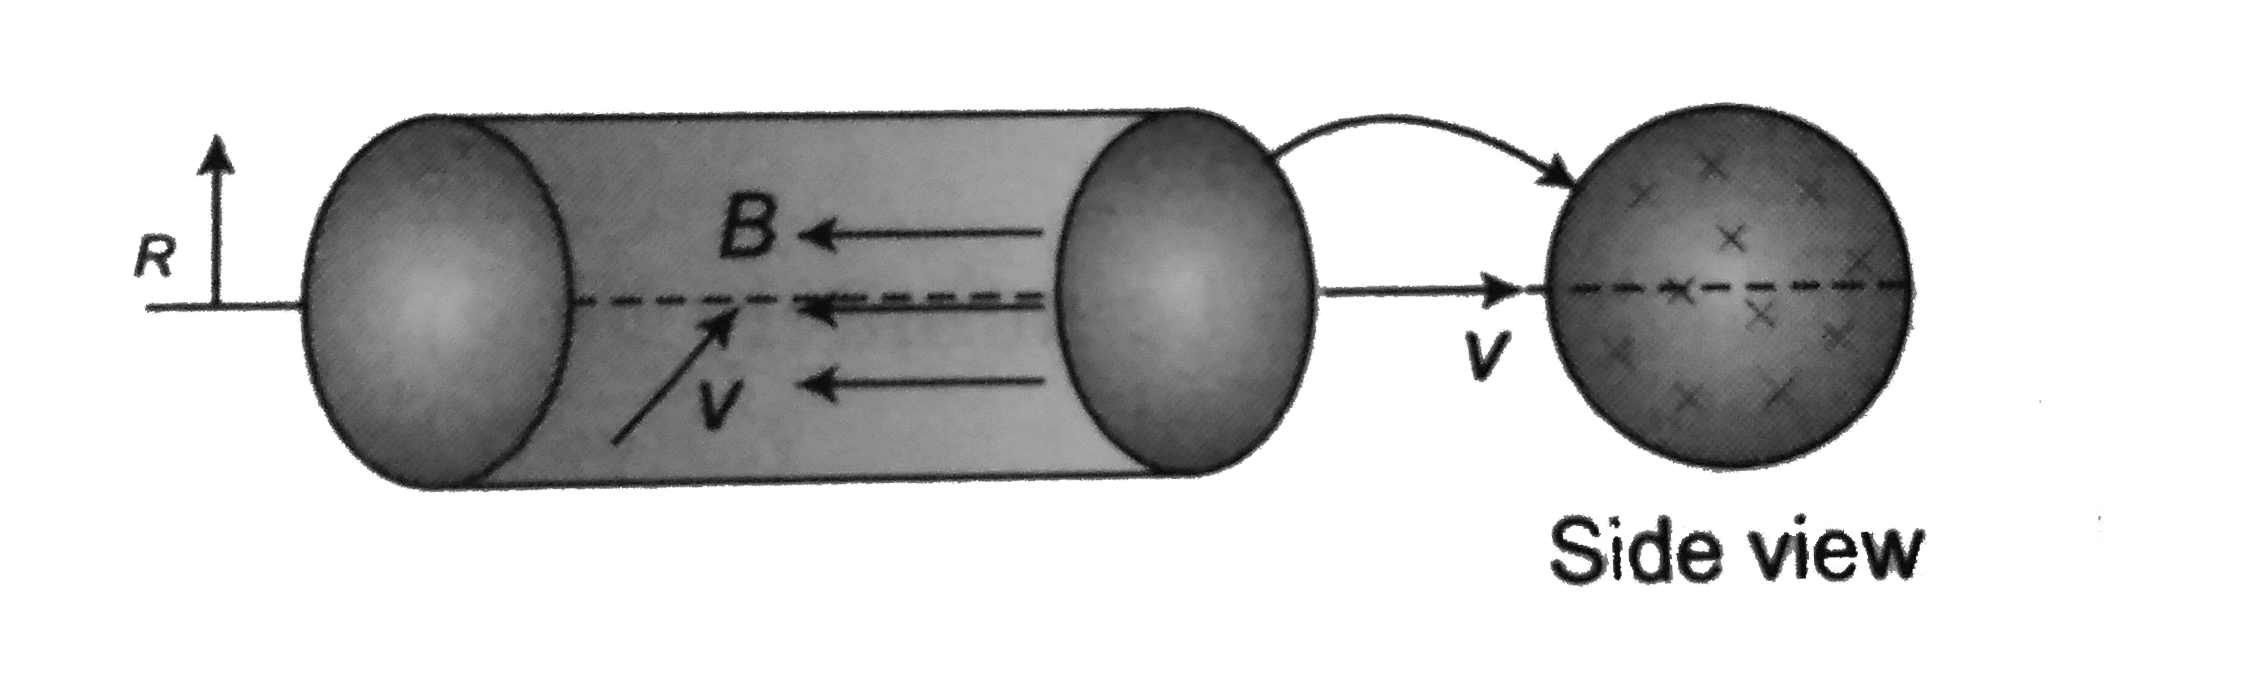 In a cylinderical region uniform magnetic field is present as shown in the figure. The cylinder is kept on a horizontal plane and its axis is horizontal. If a charge particle of mass m and charge q is projected horizontally with velocity v through a hole normal to the axis of the cylinder as shown in the diagram. An observer states the particle moves first undeviated and subsequently. oscillates inside cylinder along a horizontal diameter passing through axis of the cylinder time period